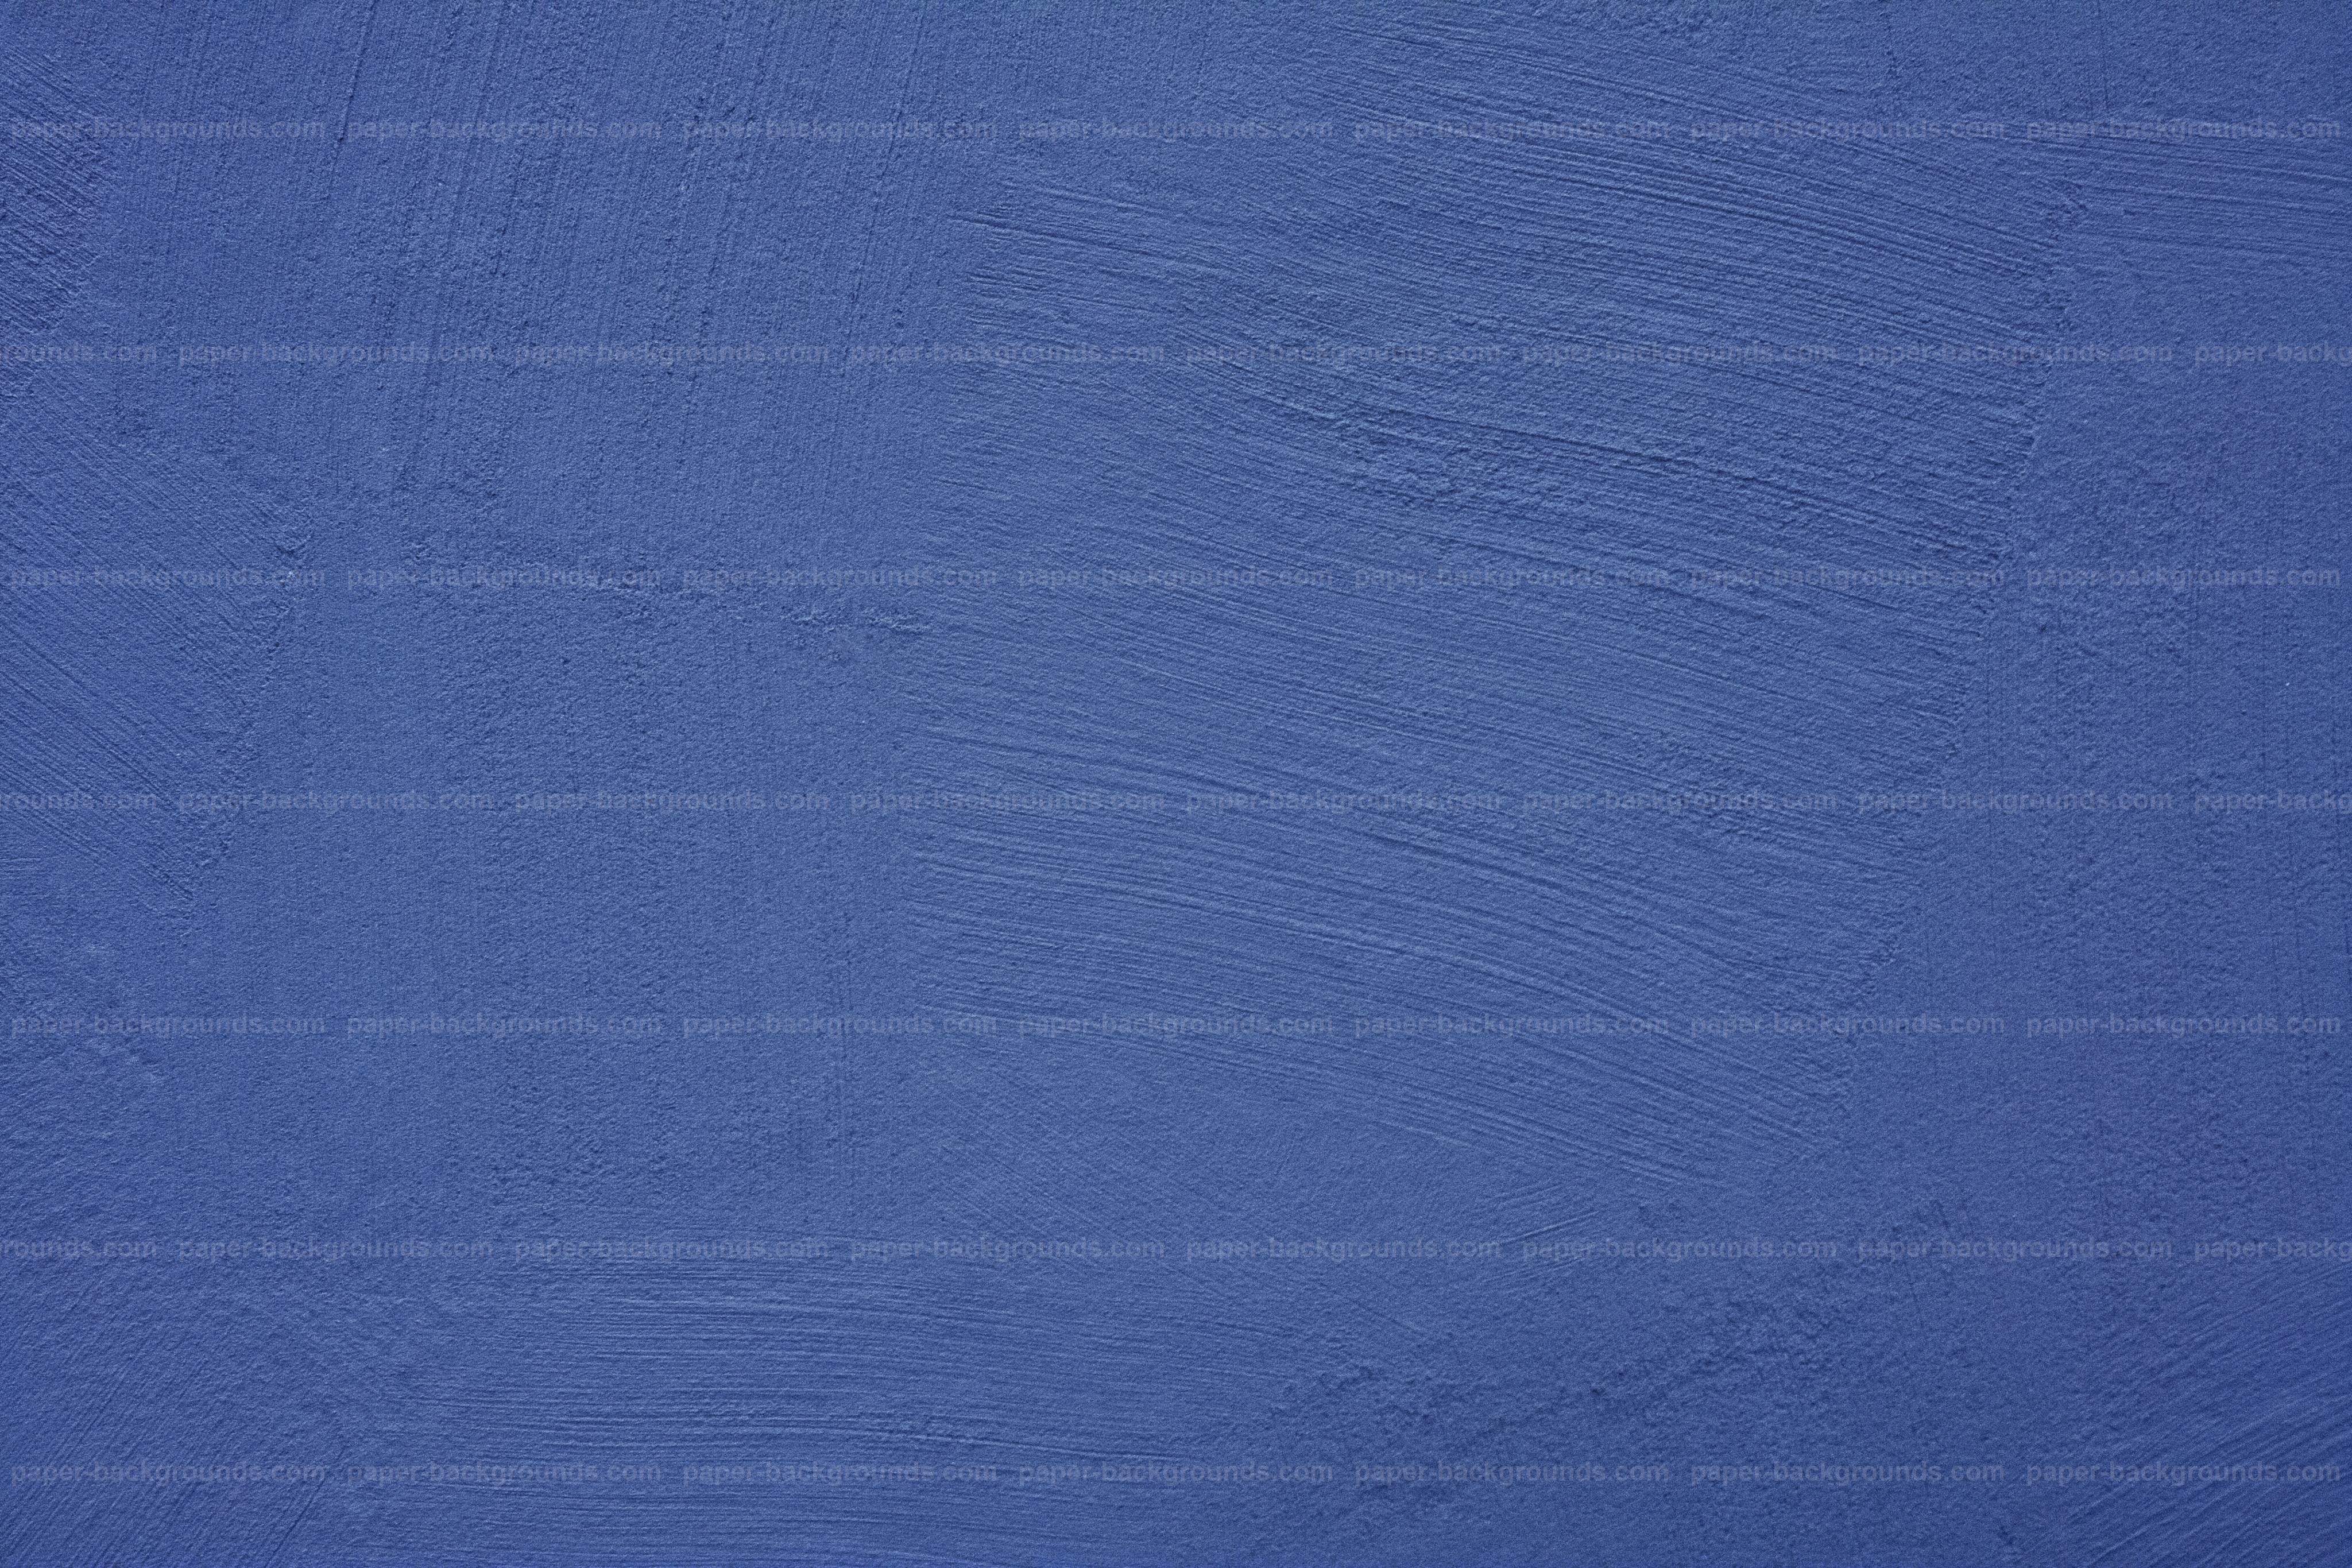 Paper Backgrounds | Blue Painted Concrete Wall Texture High Resolution